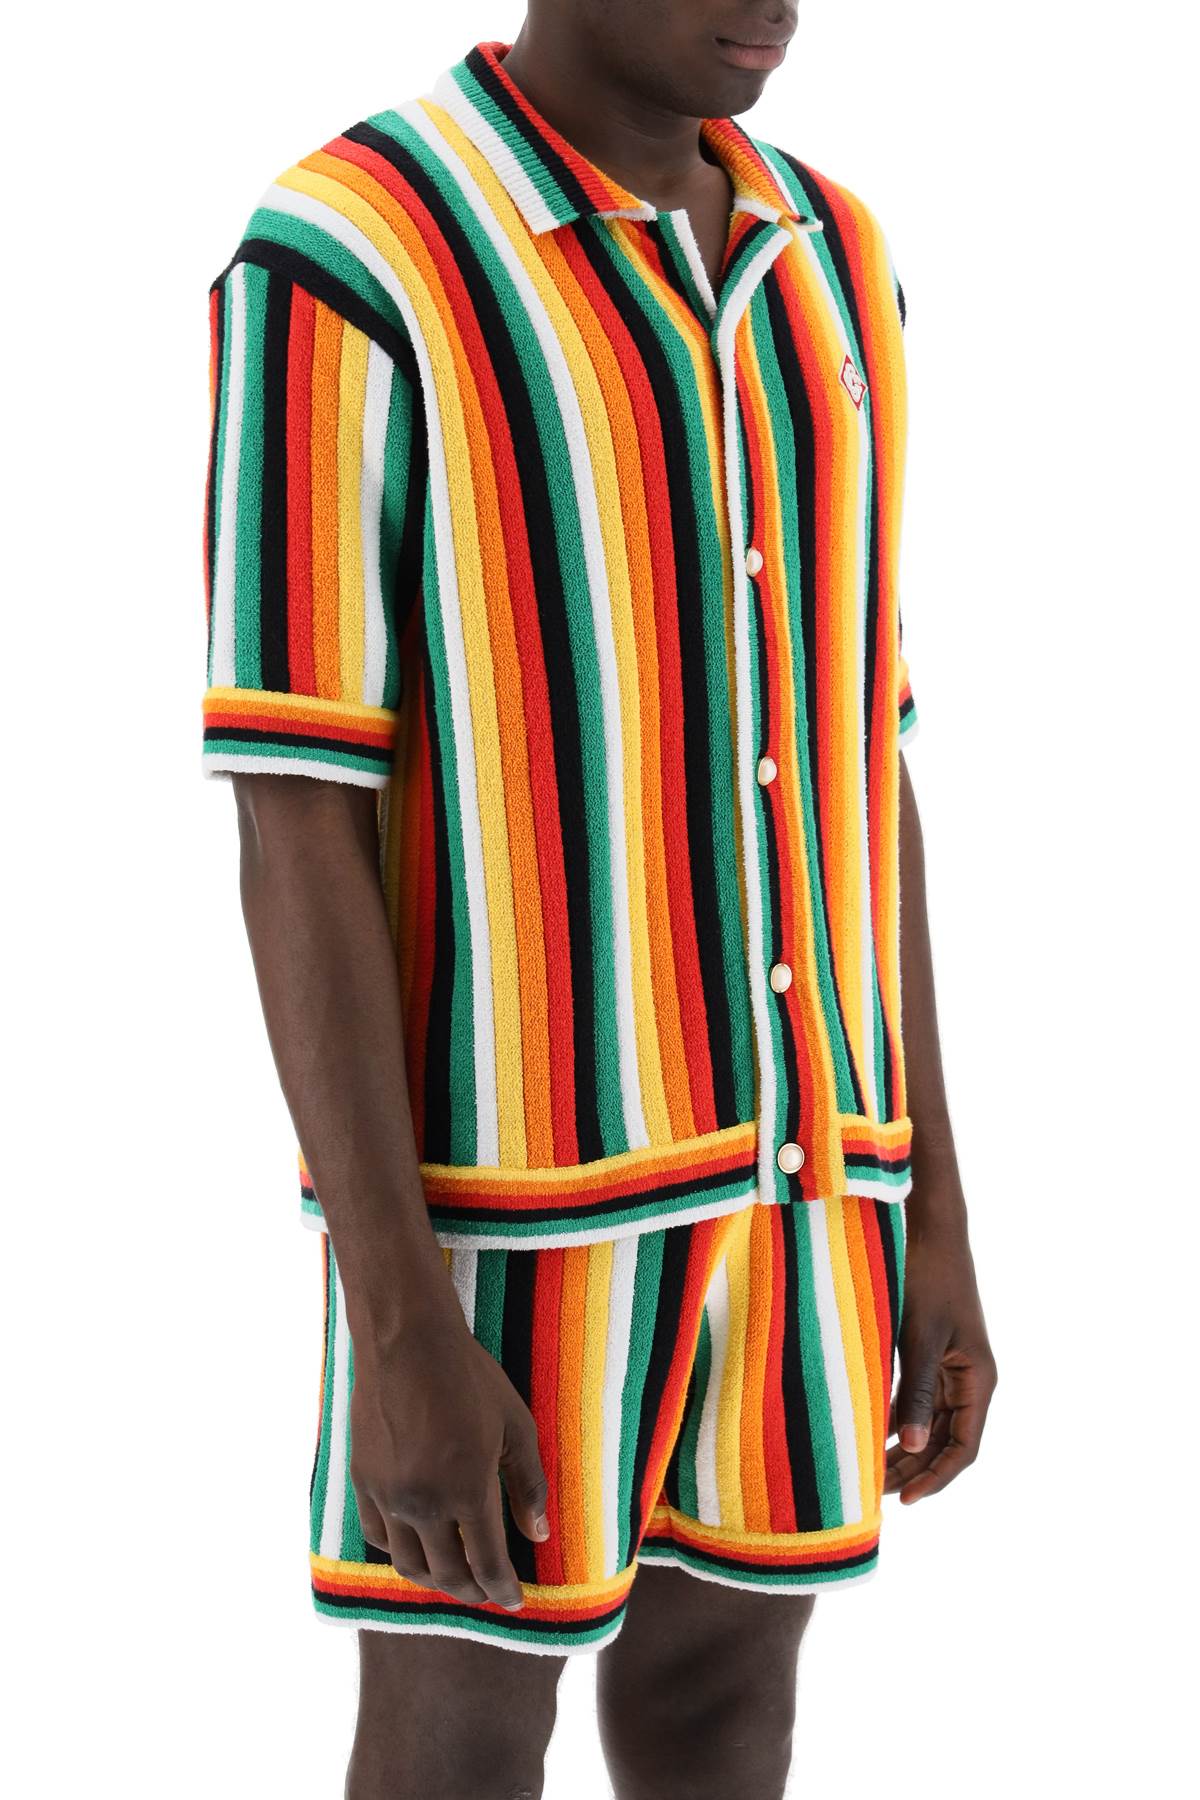 Shop Casablanca Striped Knit Bowling Shirt With Nine Words In Multicolor